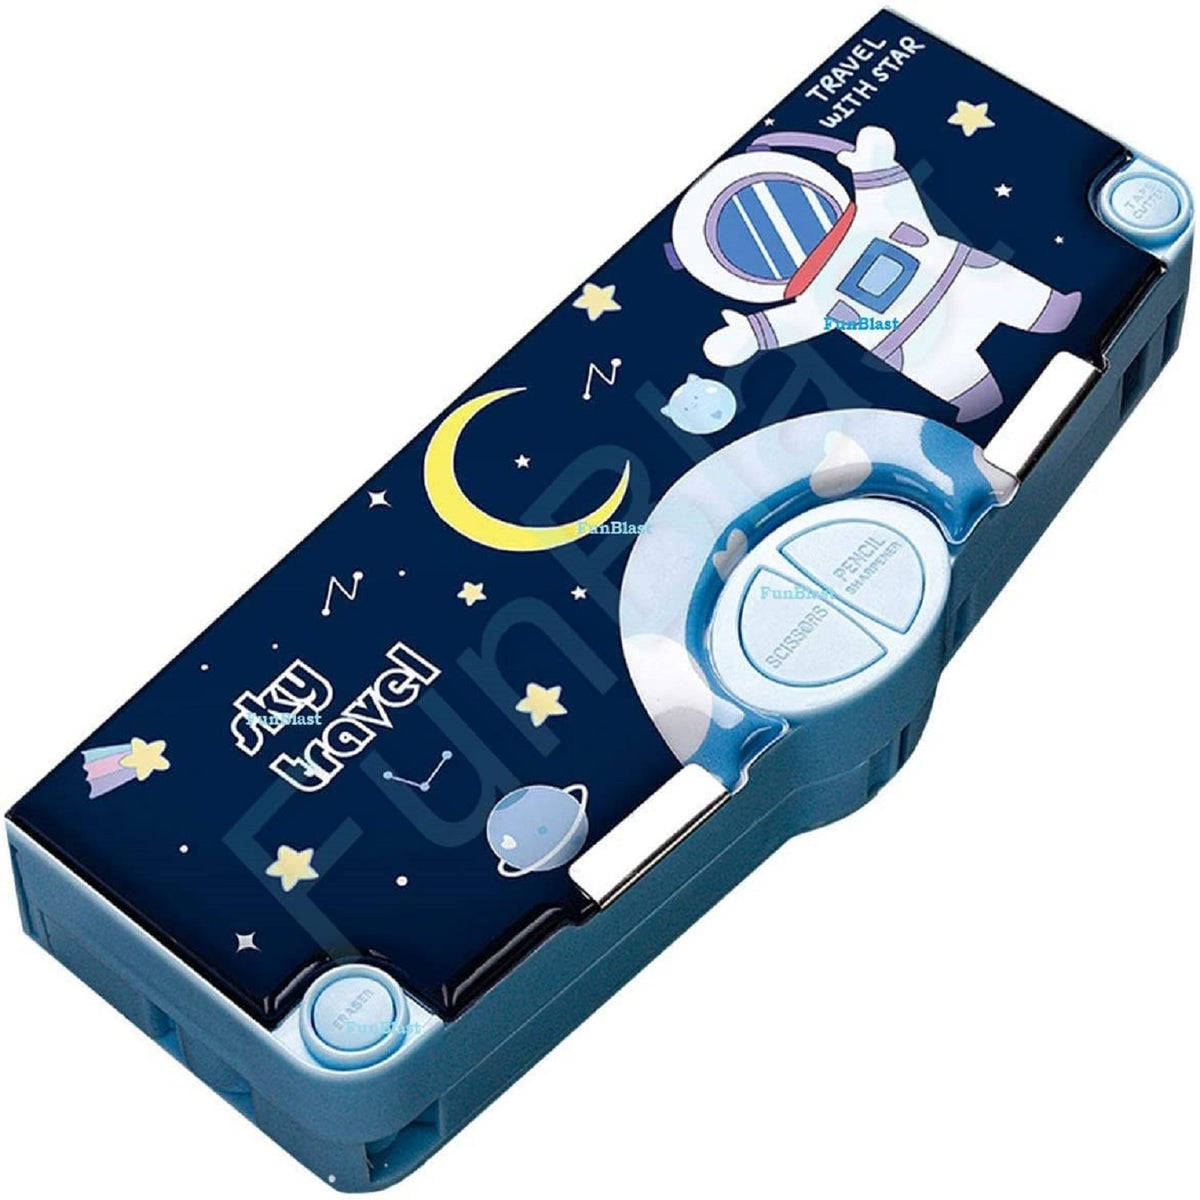 Multifunctional Pencil Box for Kids, Space Pencil Box for Boys, Magnetic Pencil Box for Boys, Pop up Pencil Box